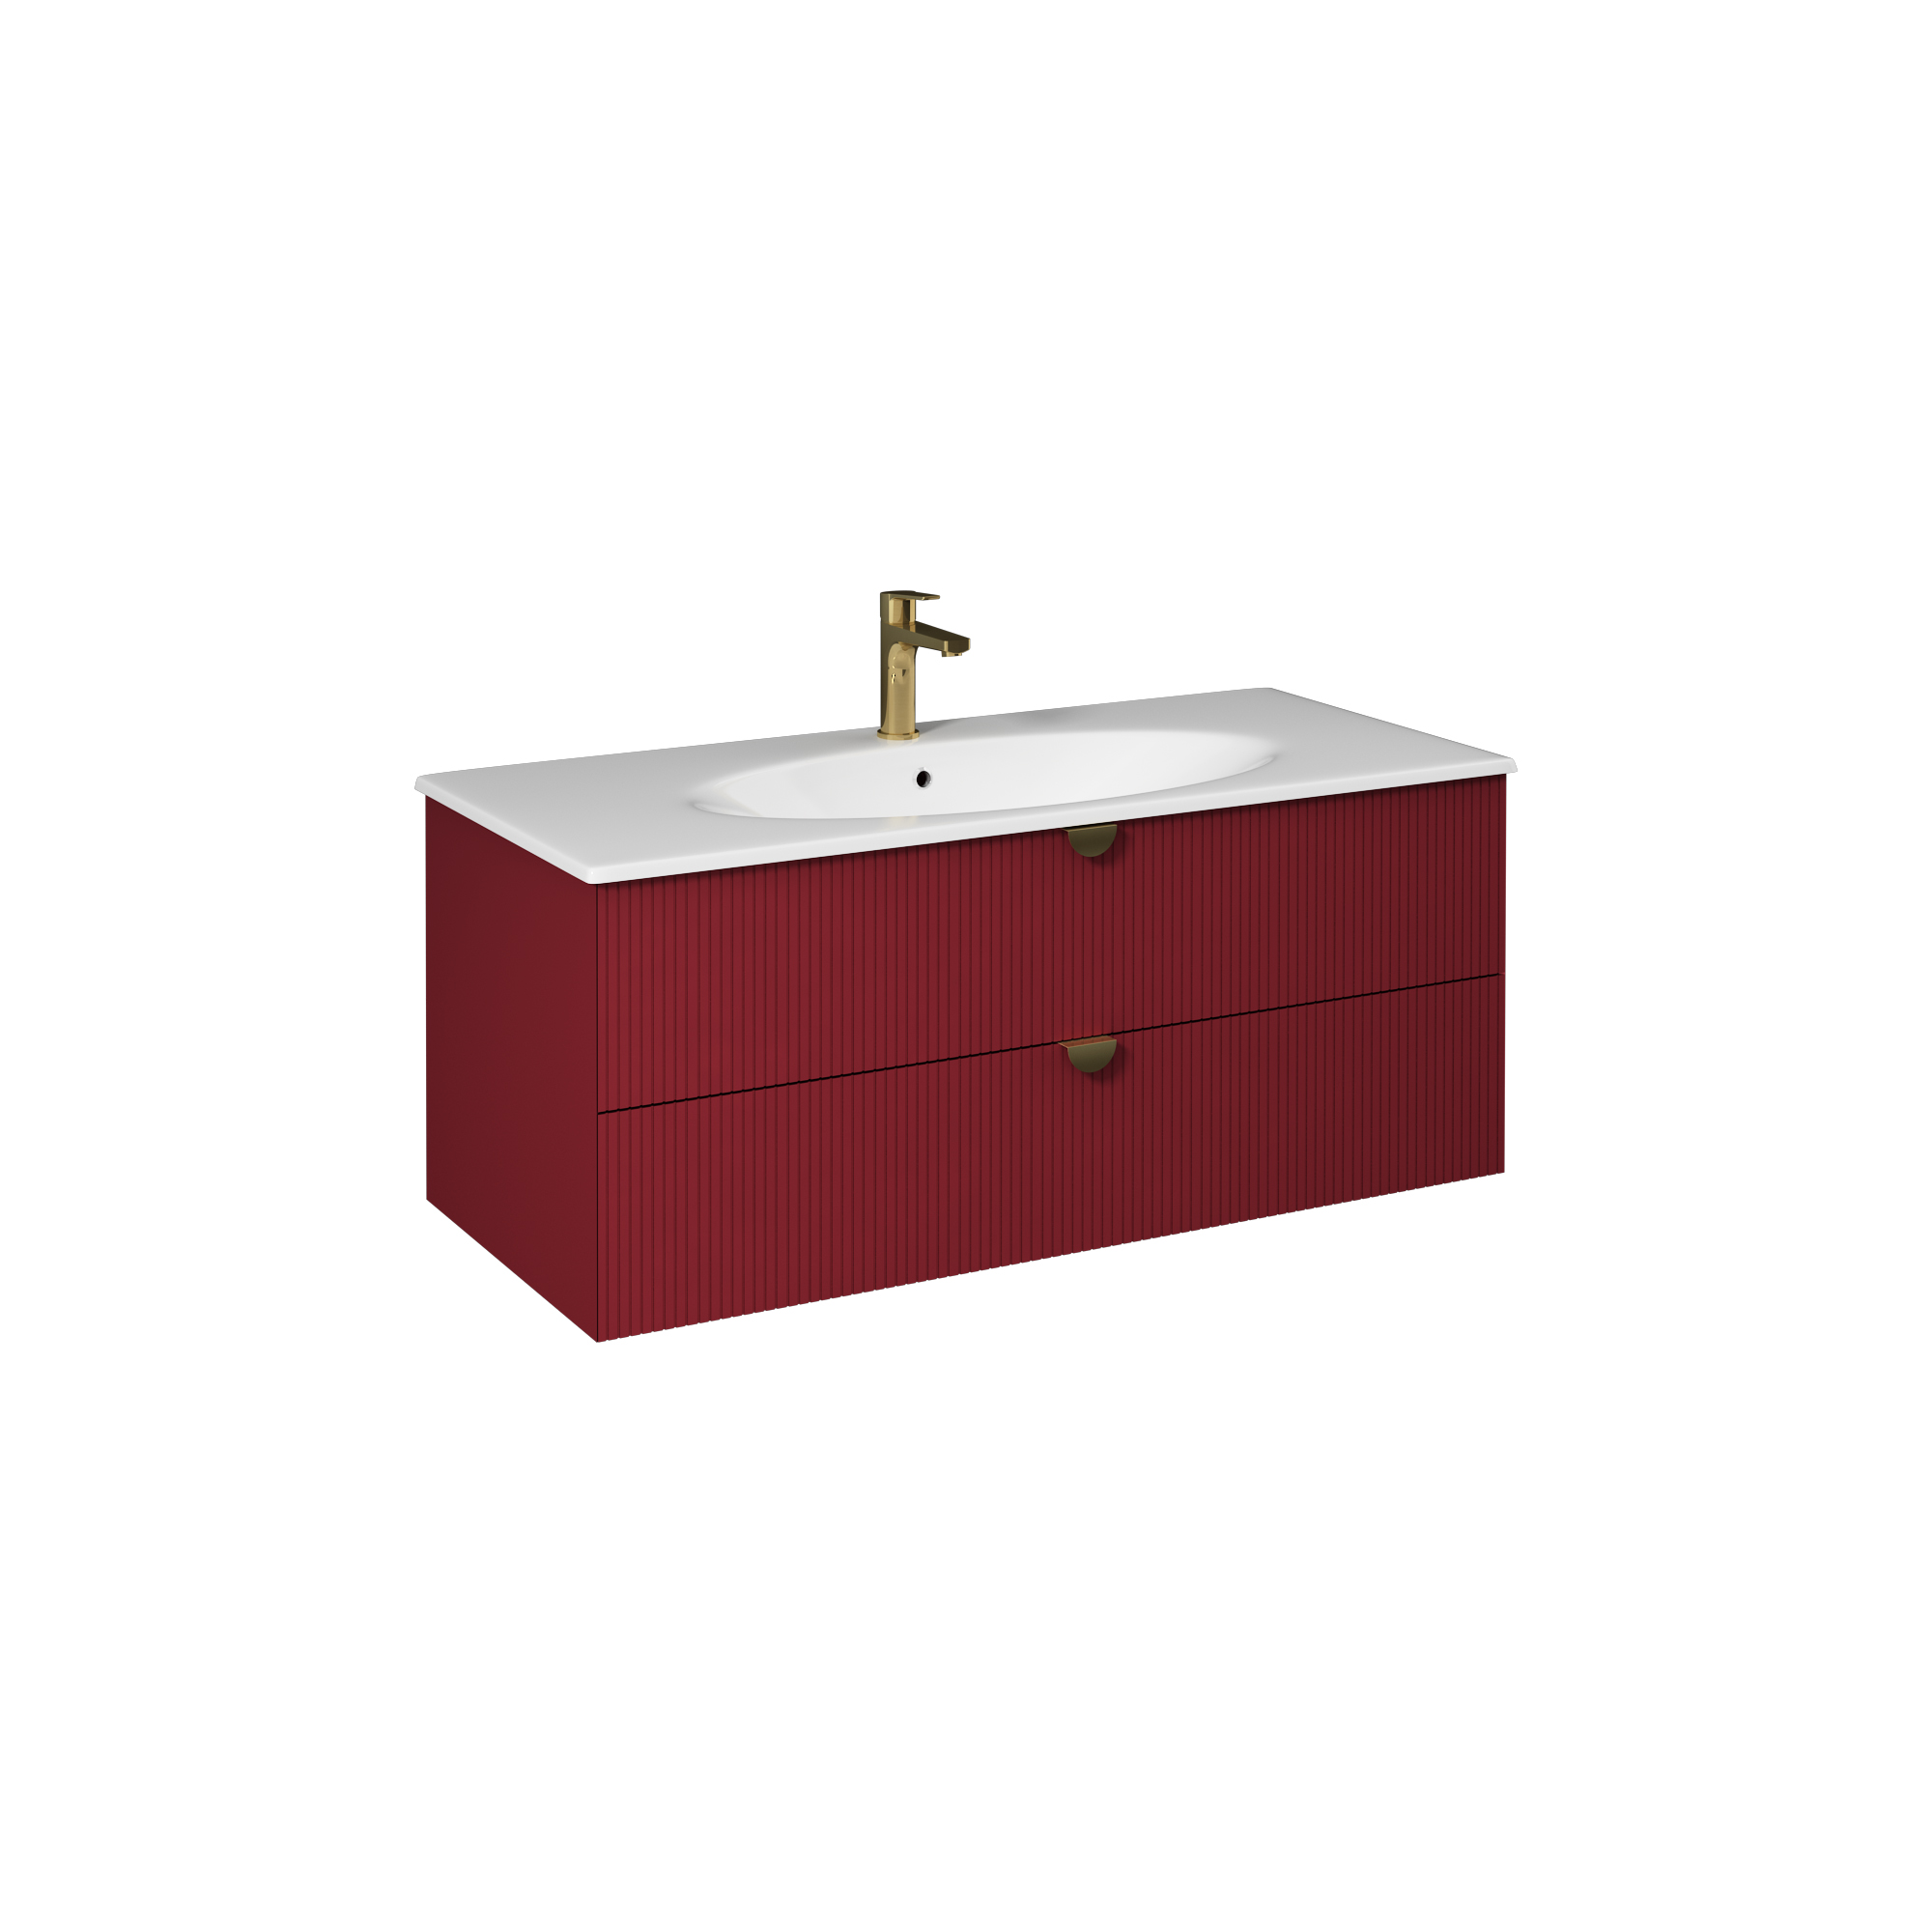 Infinity Washbasin Cabinet, Ruby Red, Handle Bright Anodizing 39"